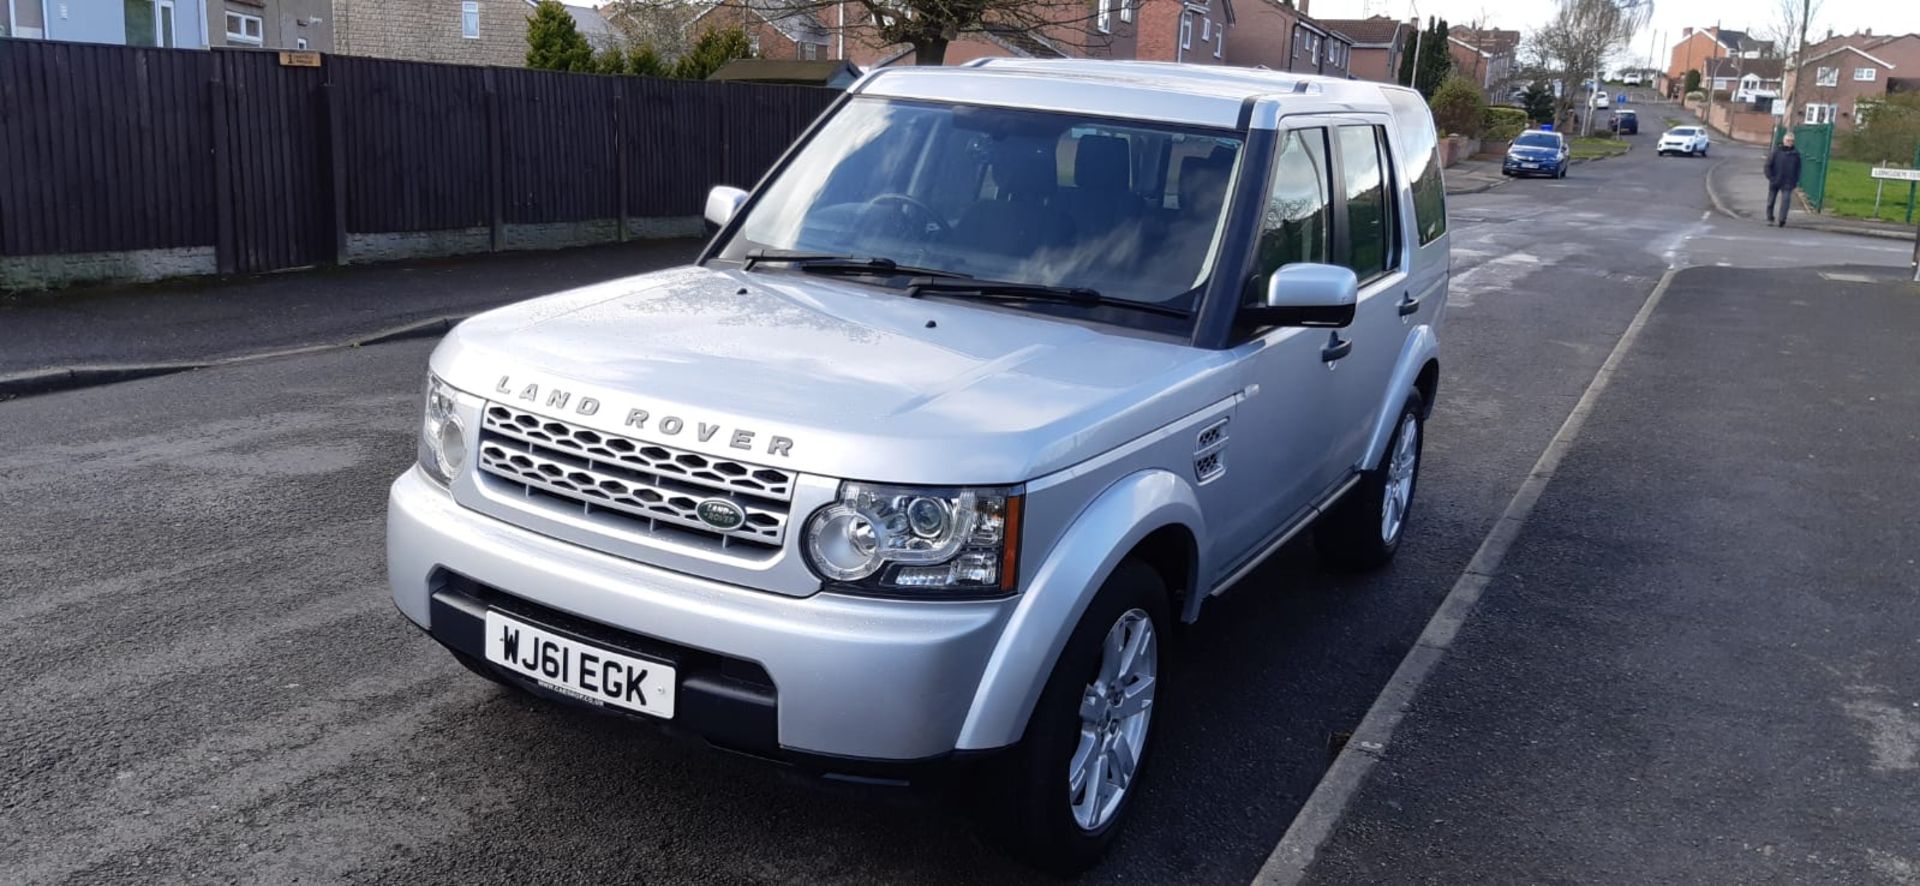 LAND ROVER DISCOVERY GS SDV6 AUTO 7 SEATER SILVER ESTATE, 127K MILES *NO VAT* - Image 4 of 16